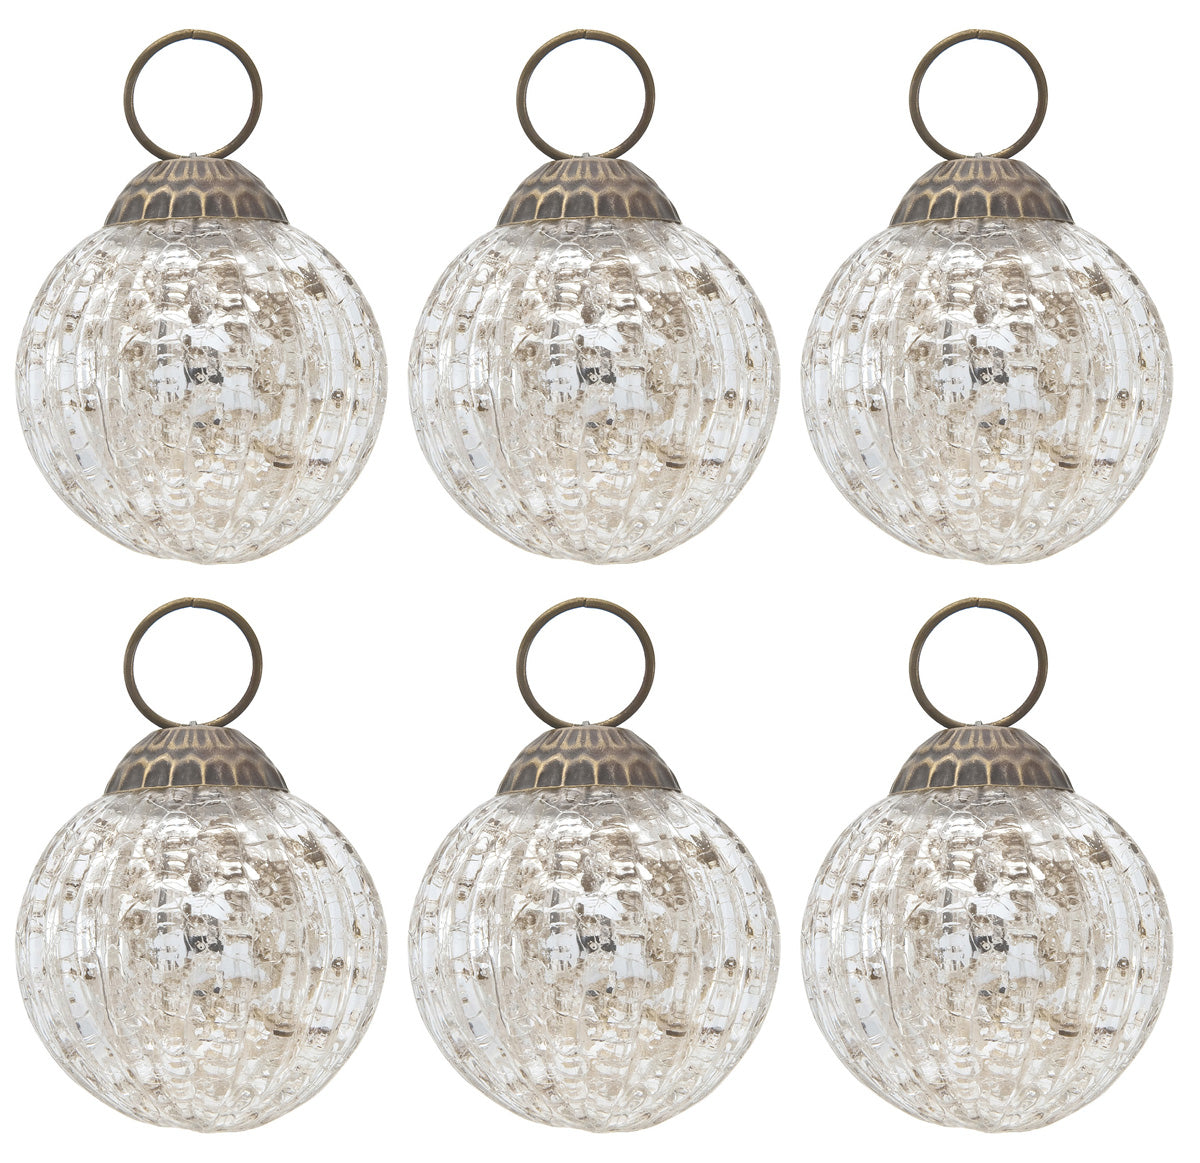 6 Pack | Mercury Glass Ball Ornaments (2-Inch, Silver, Mona Design) - Great Gift Idea, Vintage-Style Decorations for Christmas, Special Occasions, Home Decor and Parties